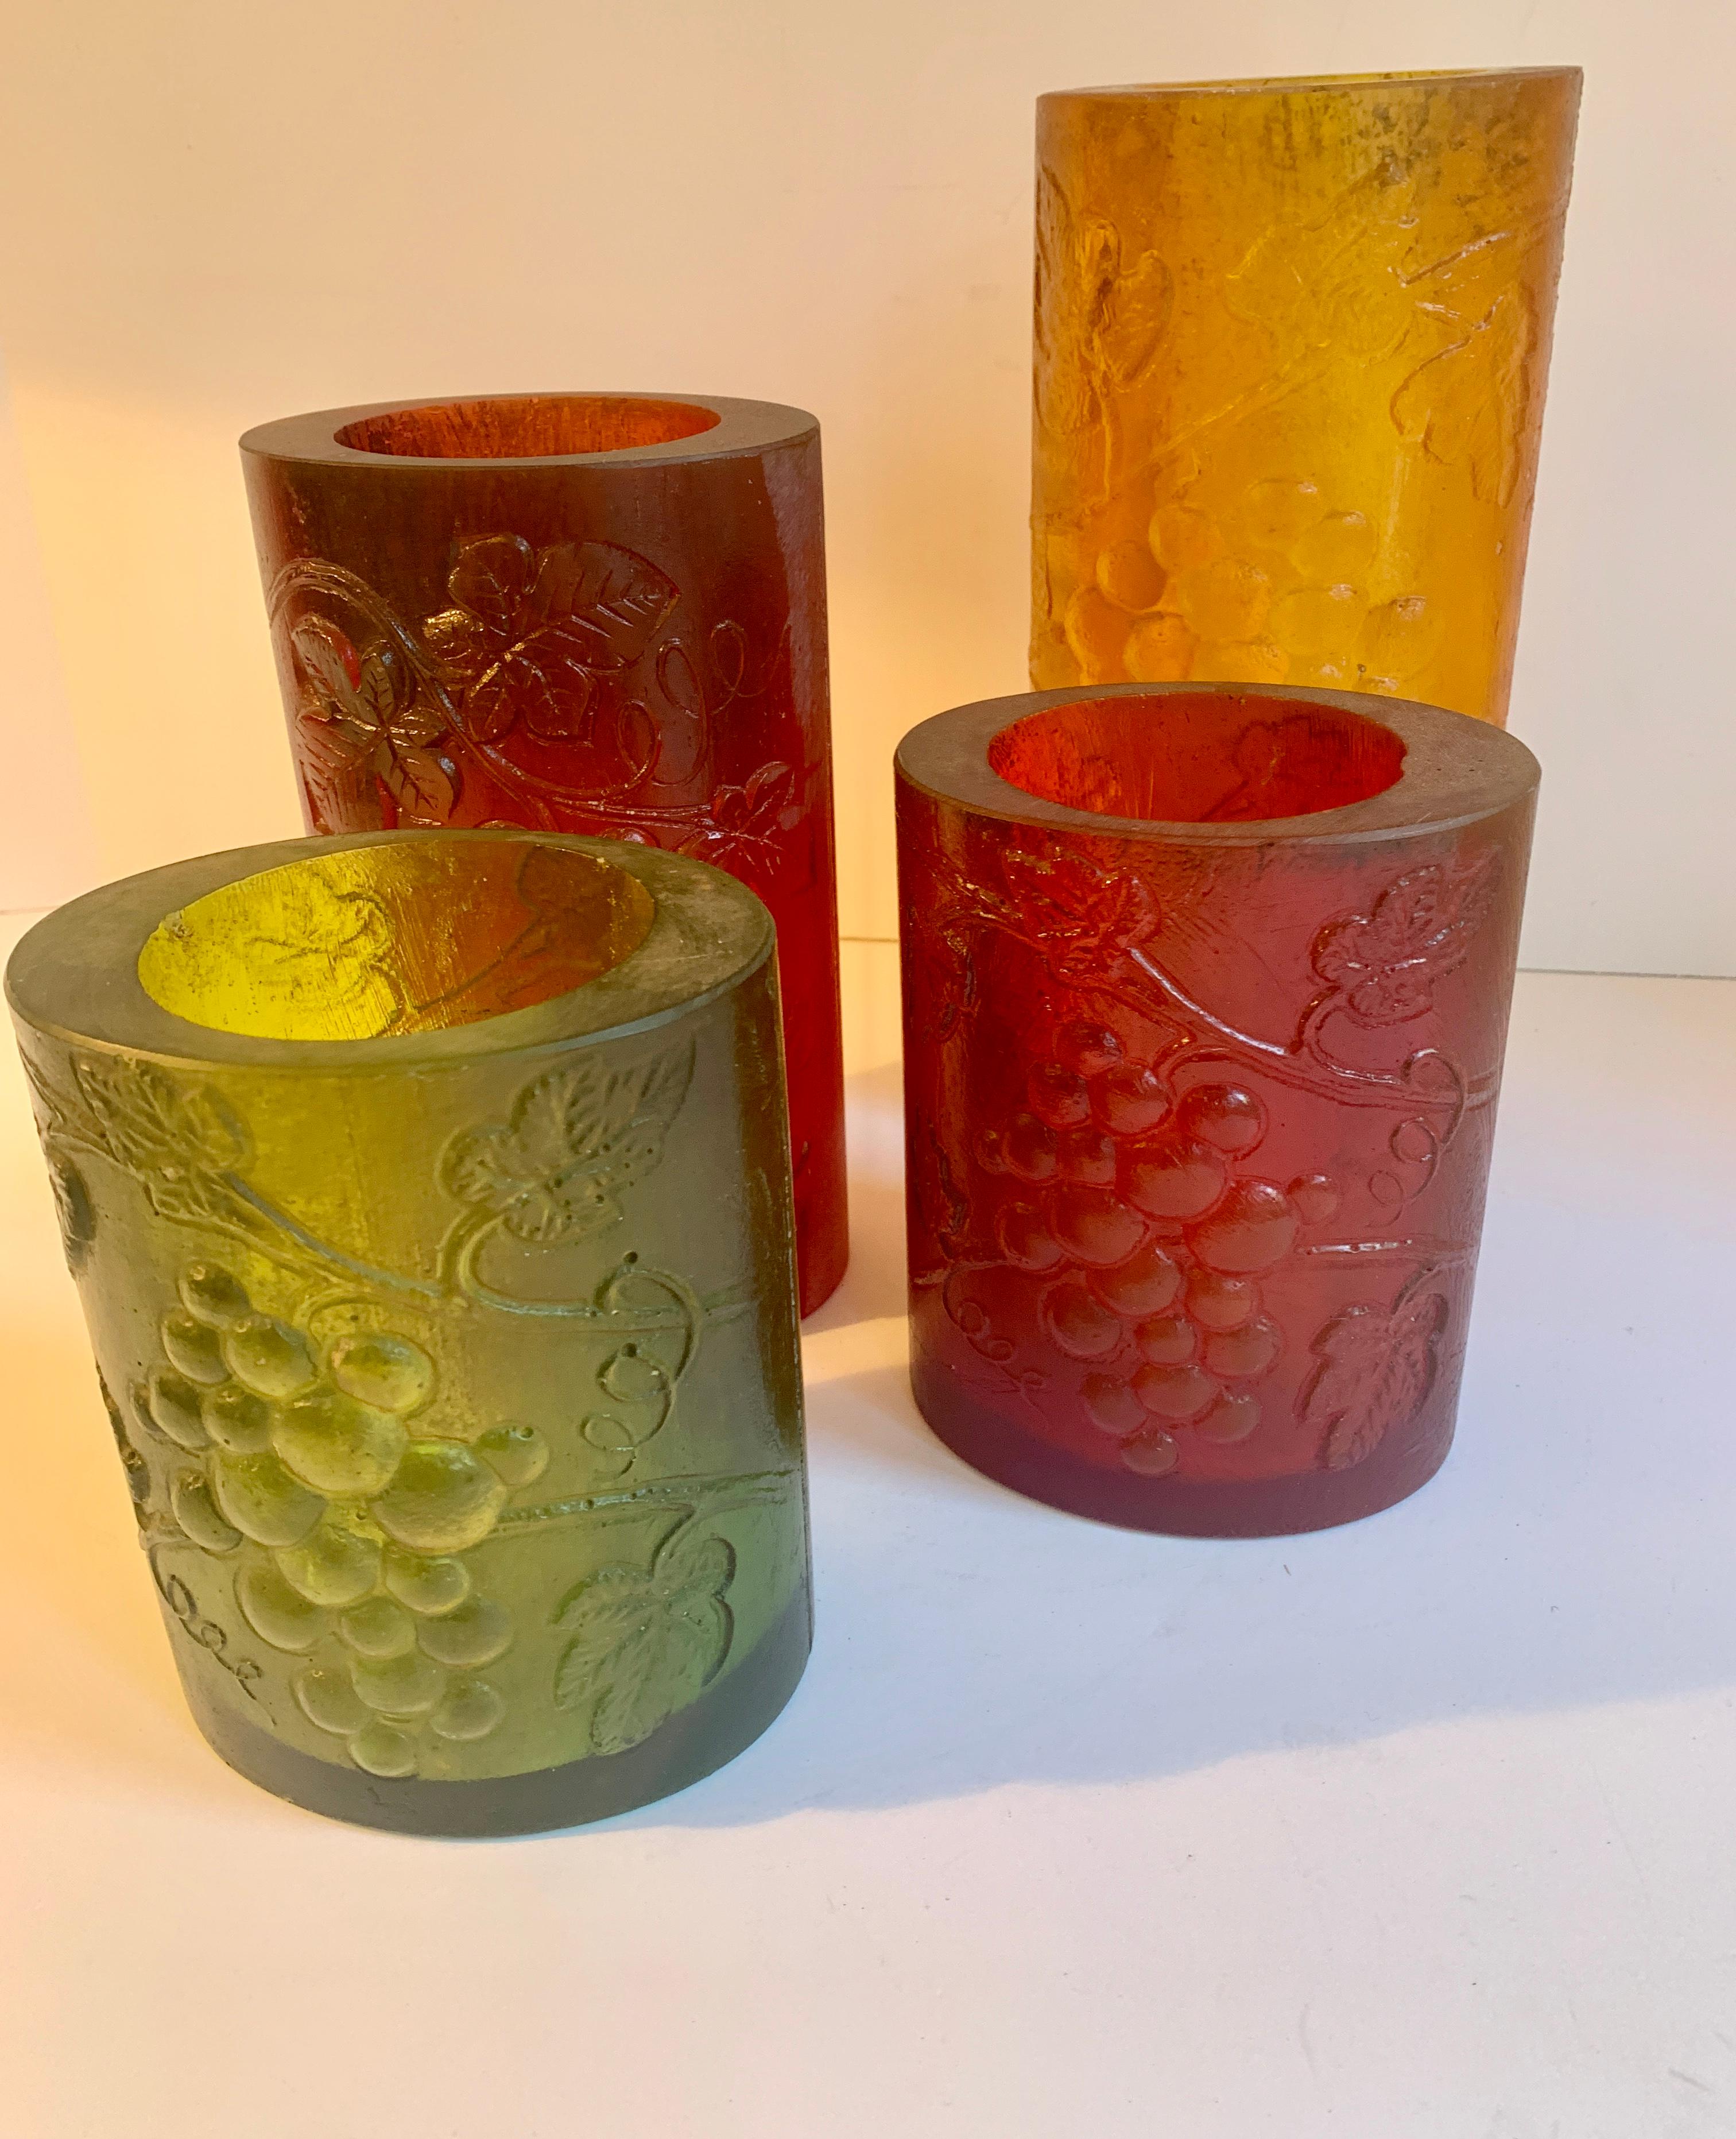 Four resin Sascha Brastoff candleholders with grape motif - perfect or any room, or outdoor table
all are 4.5